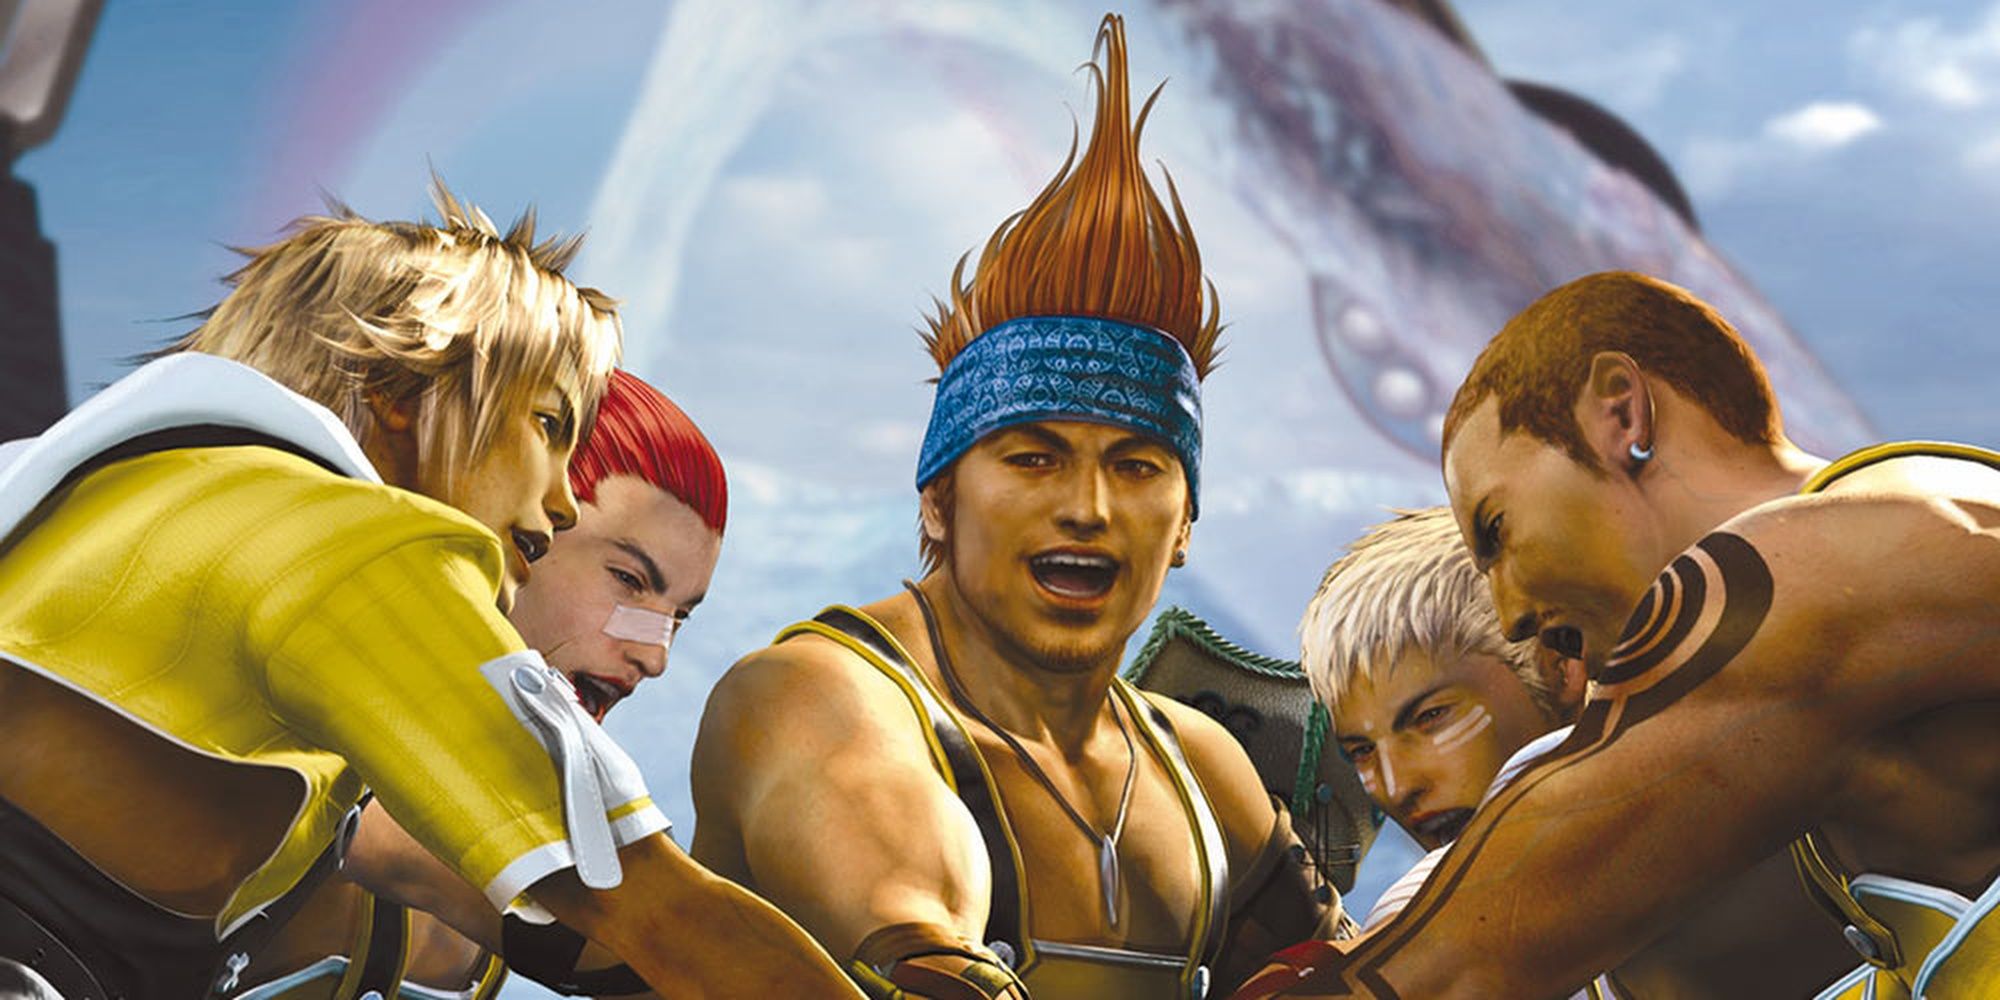 Final Fantasy X 20th Anniversary Survey Results Reveal Players' Favorite  Characters, Music, Quotes & More